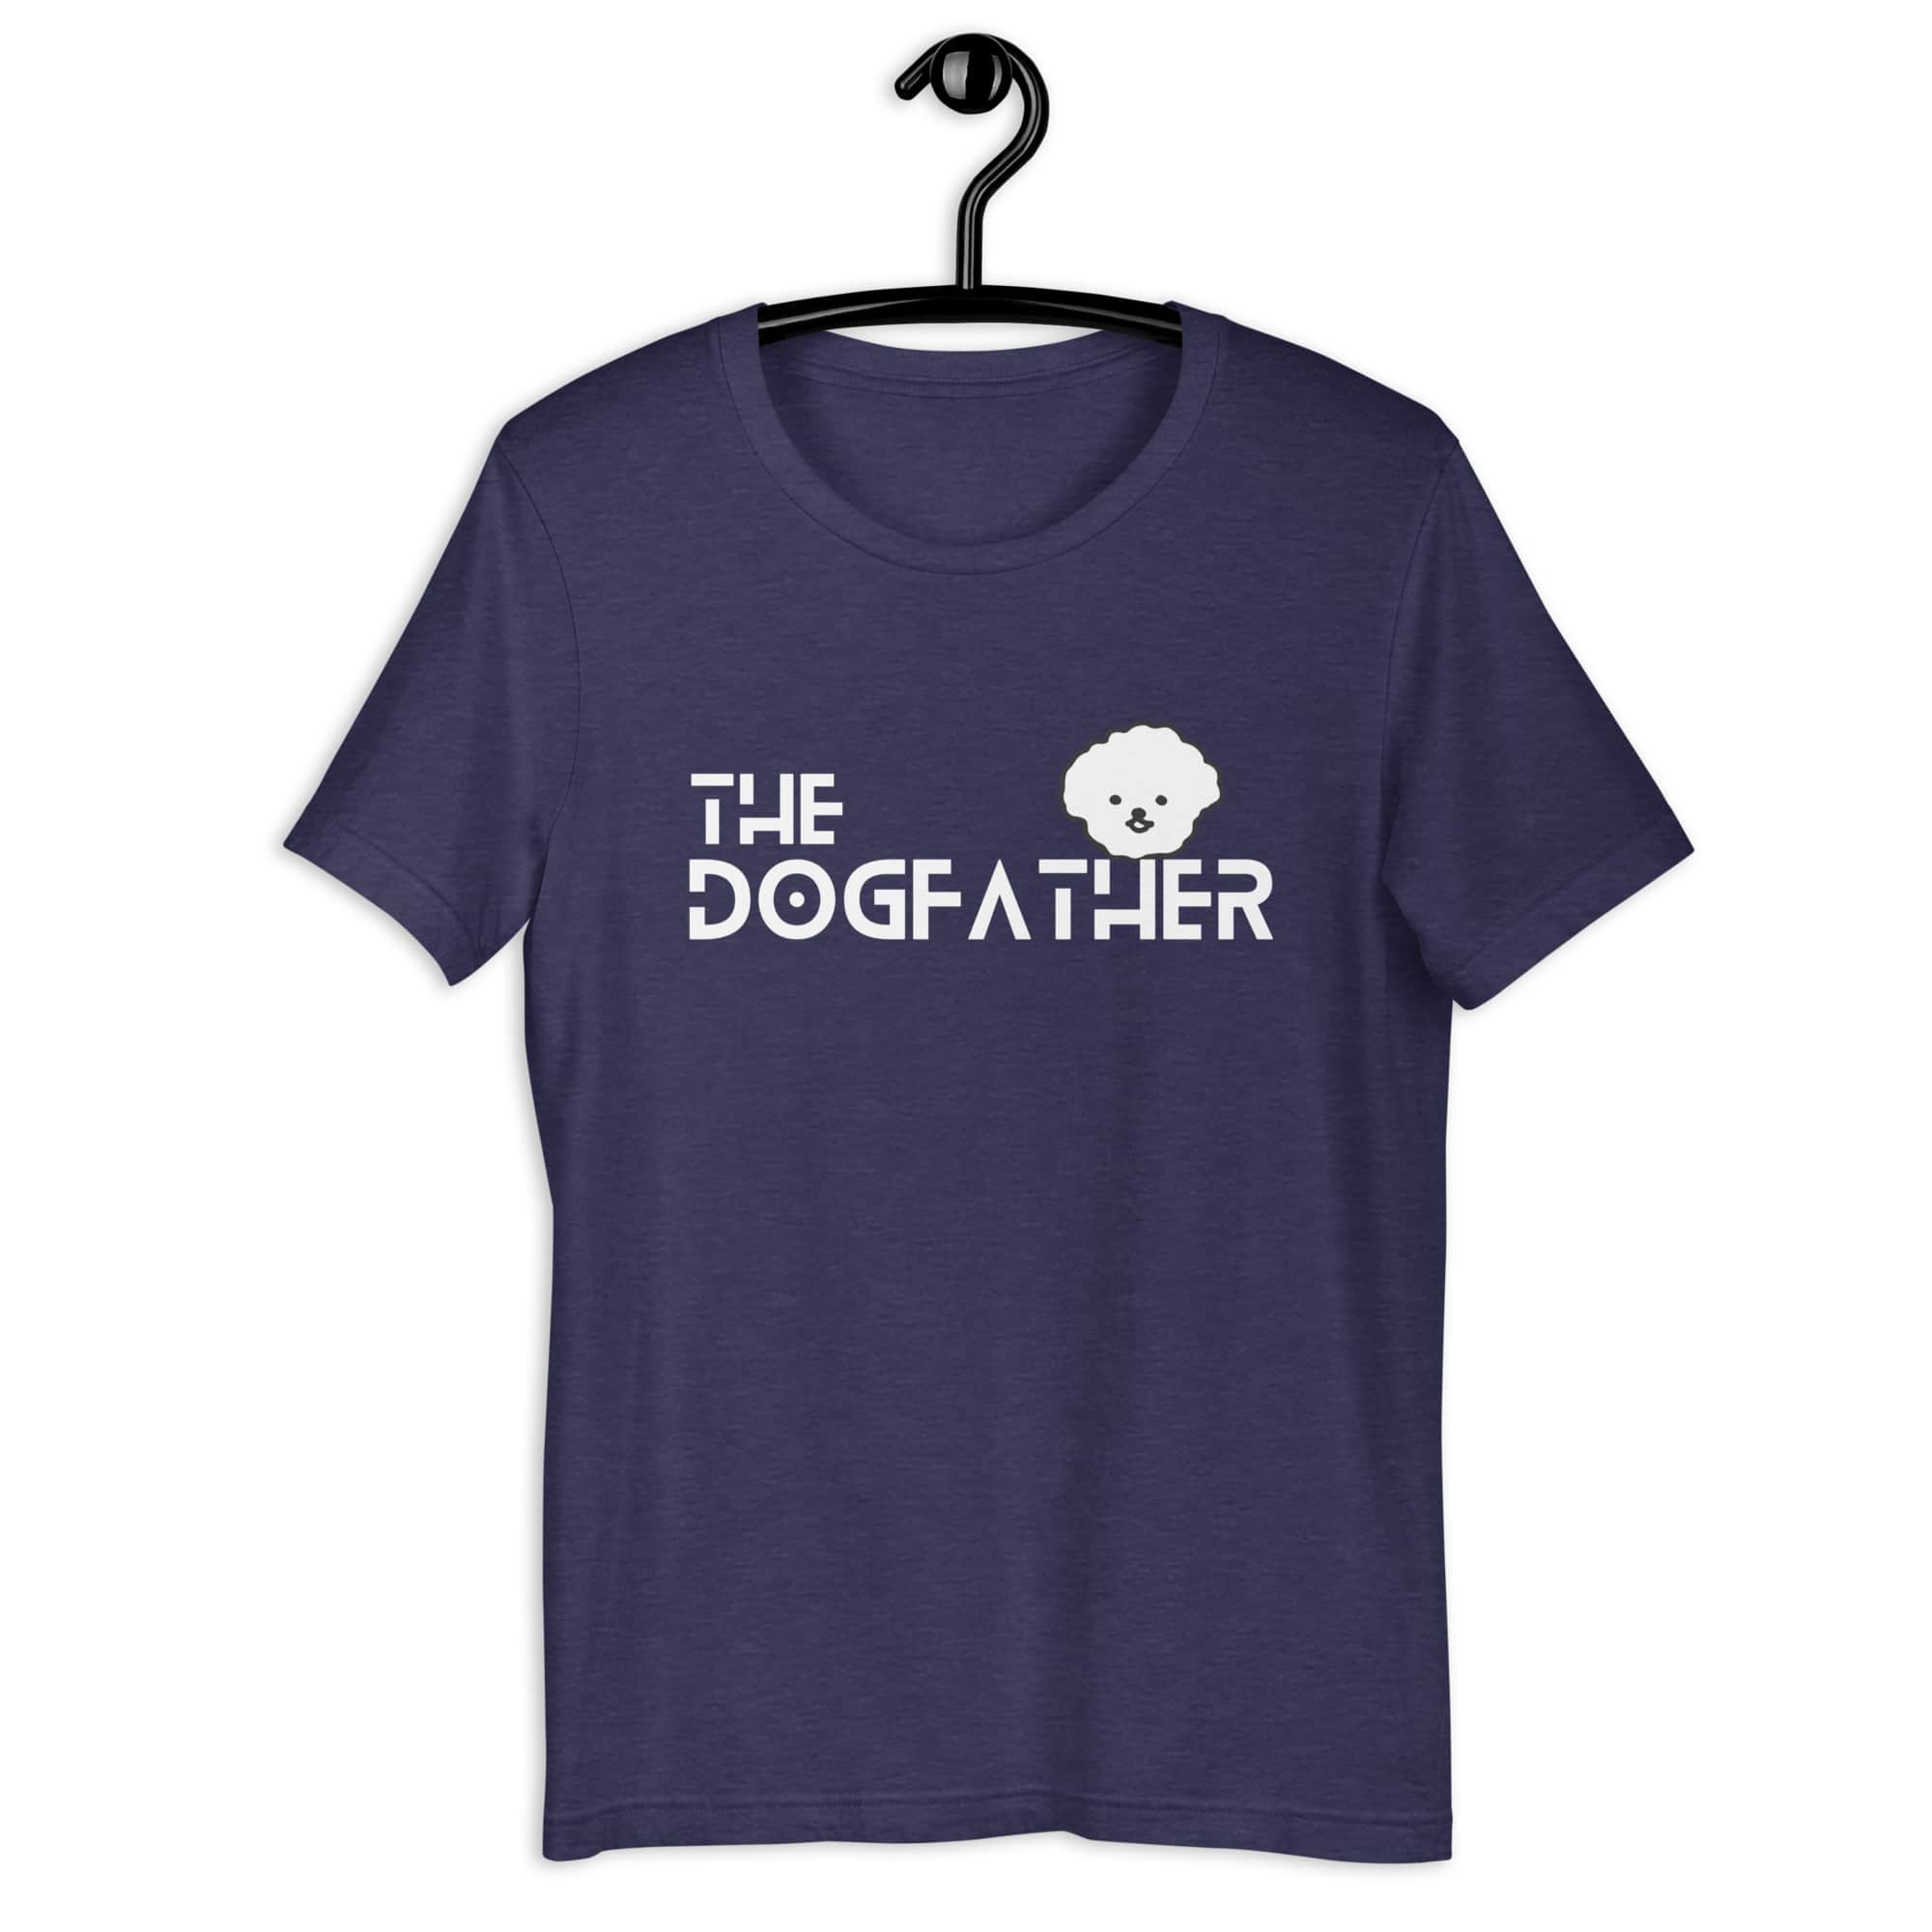 The Dogfather Poodles Unisex T-Shirt. Heather Midnight Navy